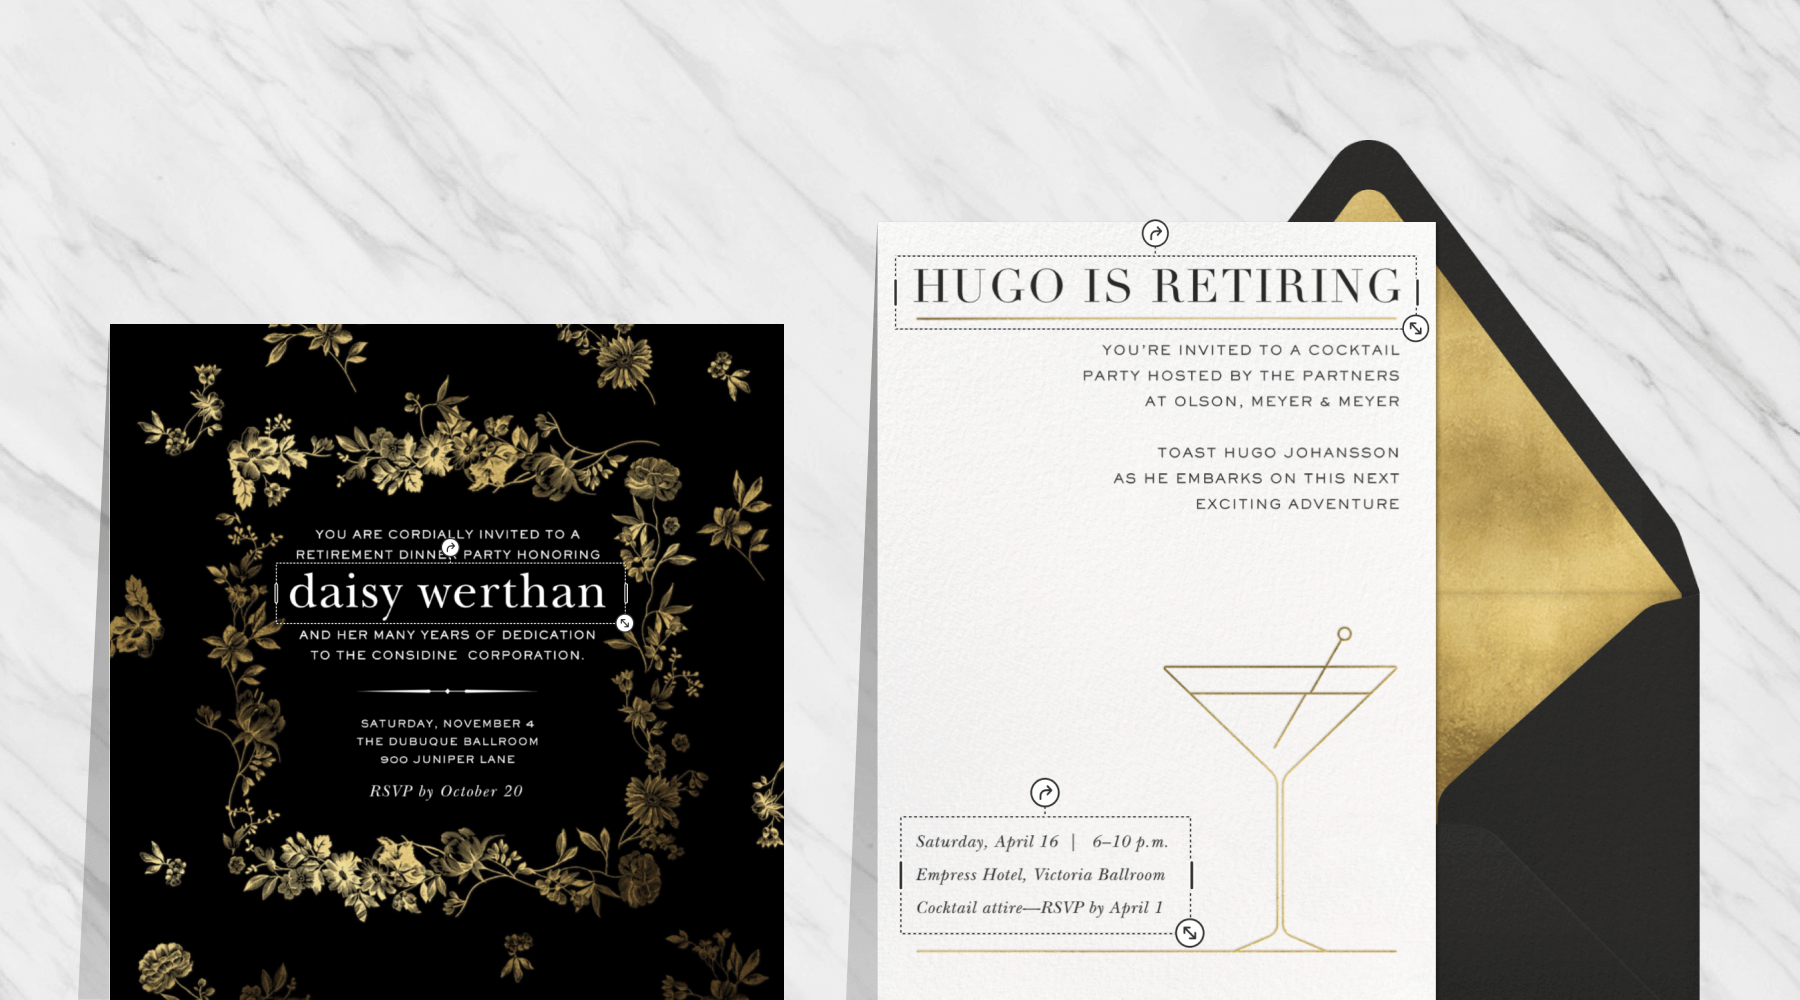 A black invitation with ornate gold foil greenery; a white invitation with a gold outlined martini glass and text boxes highlighted by a black and gold envelope.